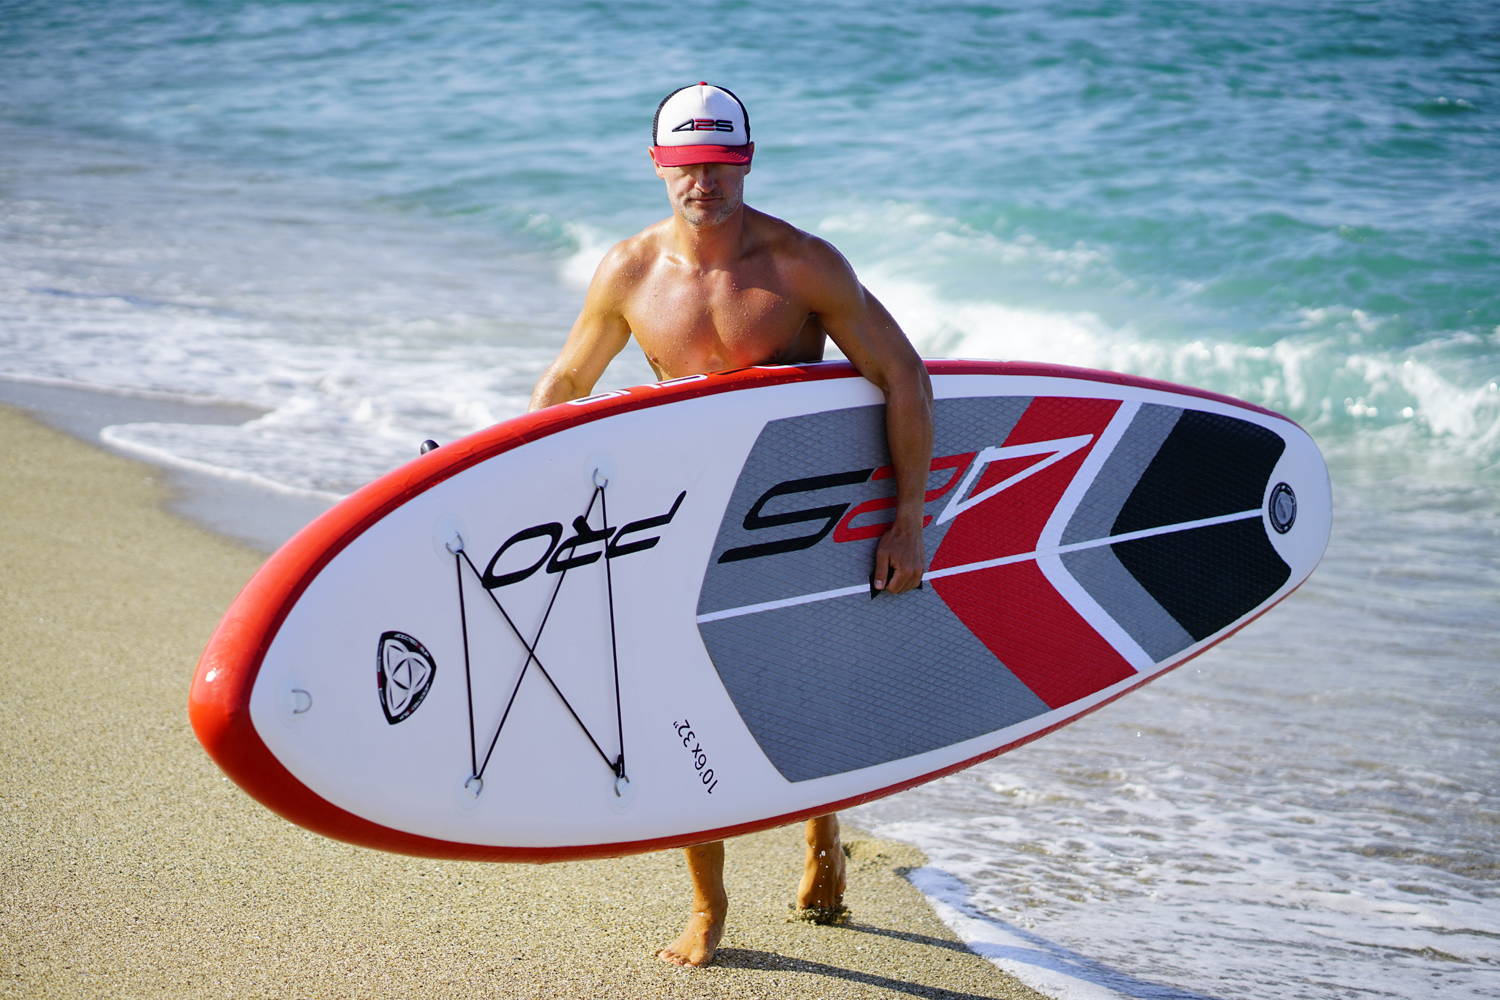 425pro Air SUP all round board: A man carrying the board out of water